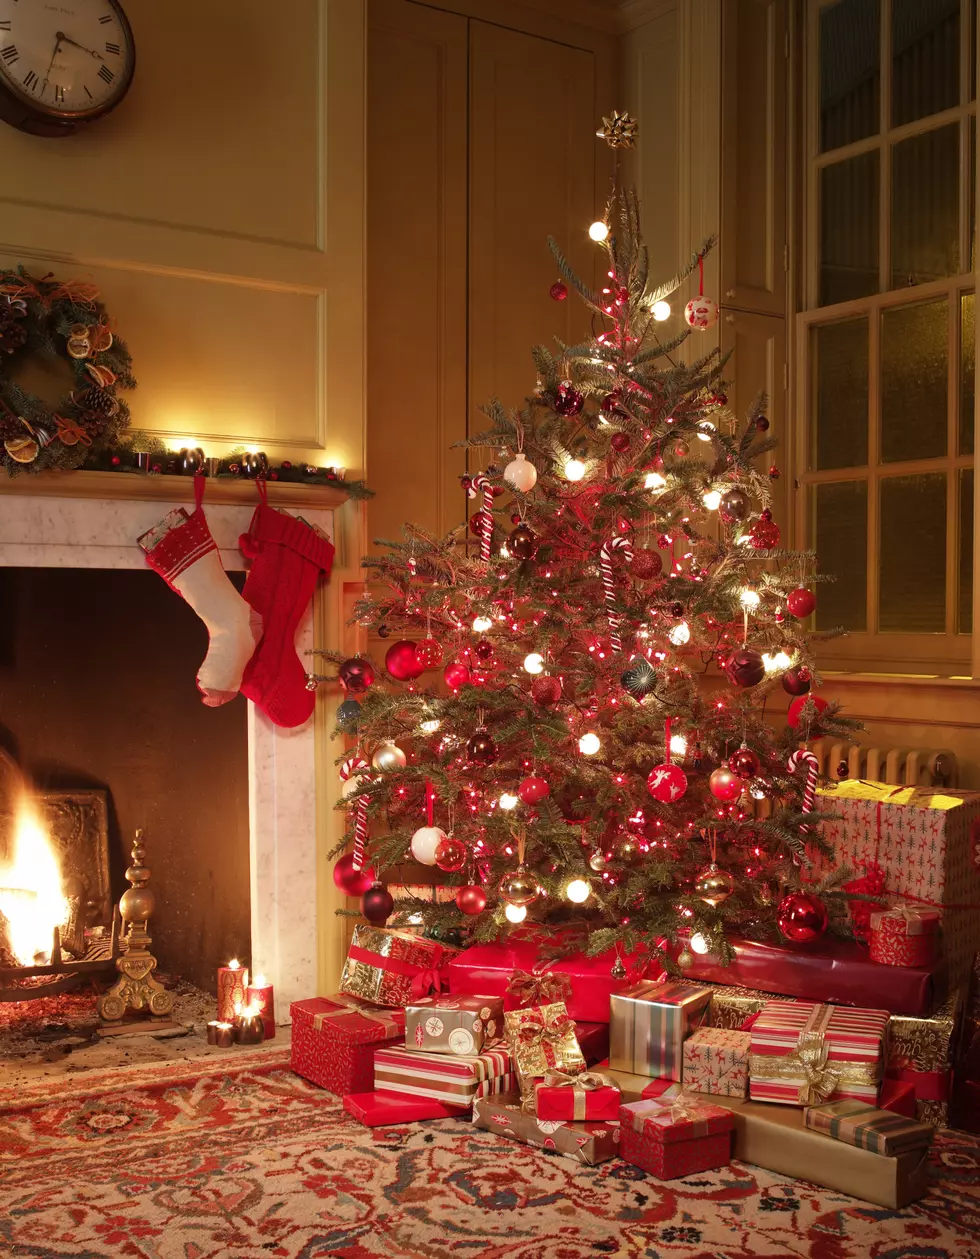 Quick! You’ll Want to Grab Your Tickets Now to See Bridgeton’s Annual Holiday House Tour